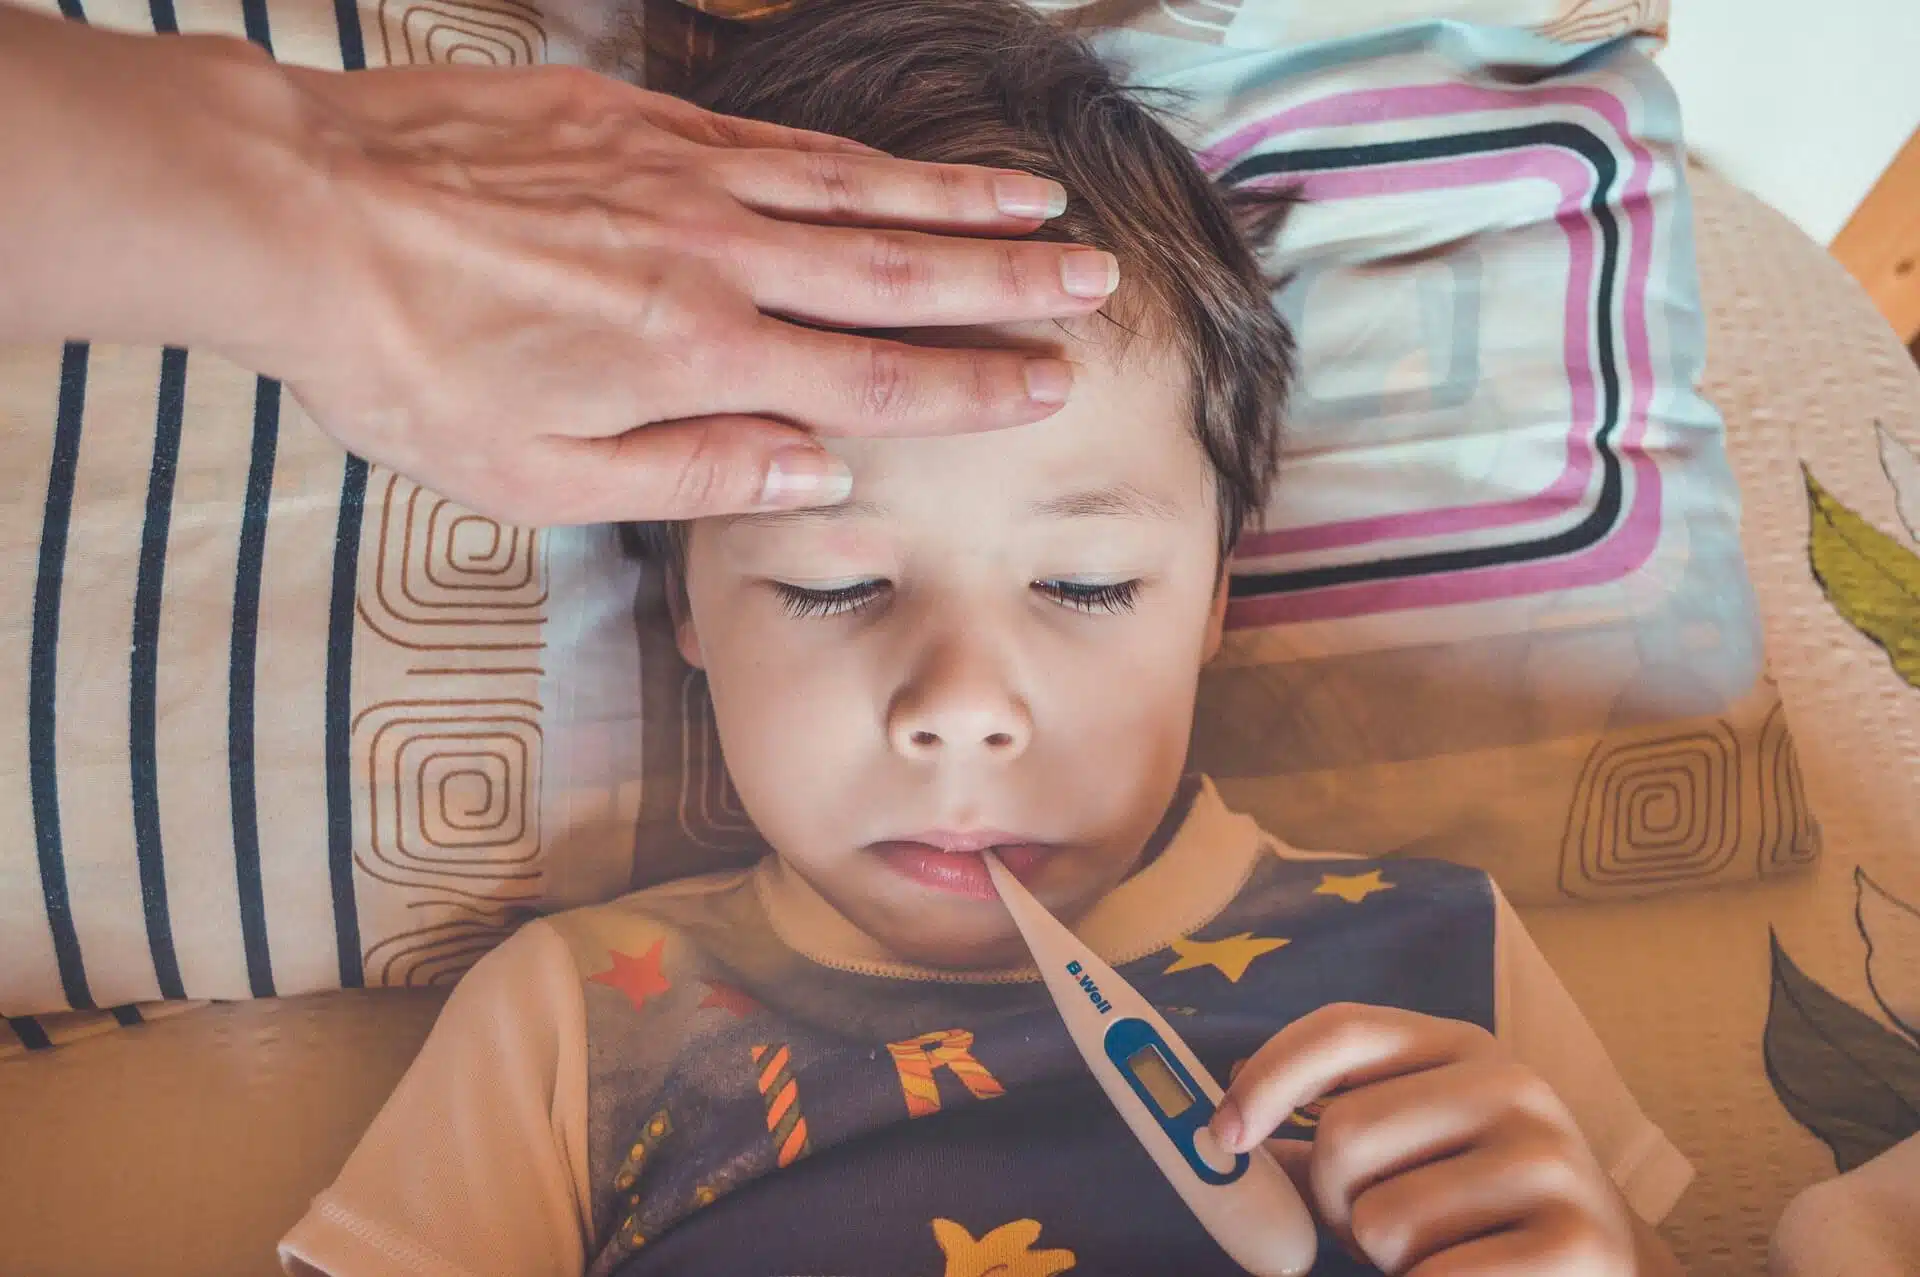 Child Having Temperature Measured With A Digital thermometer